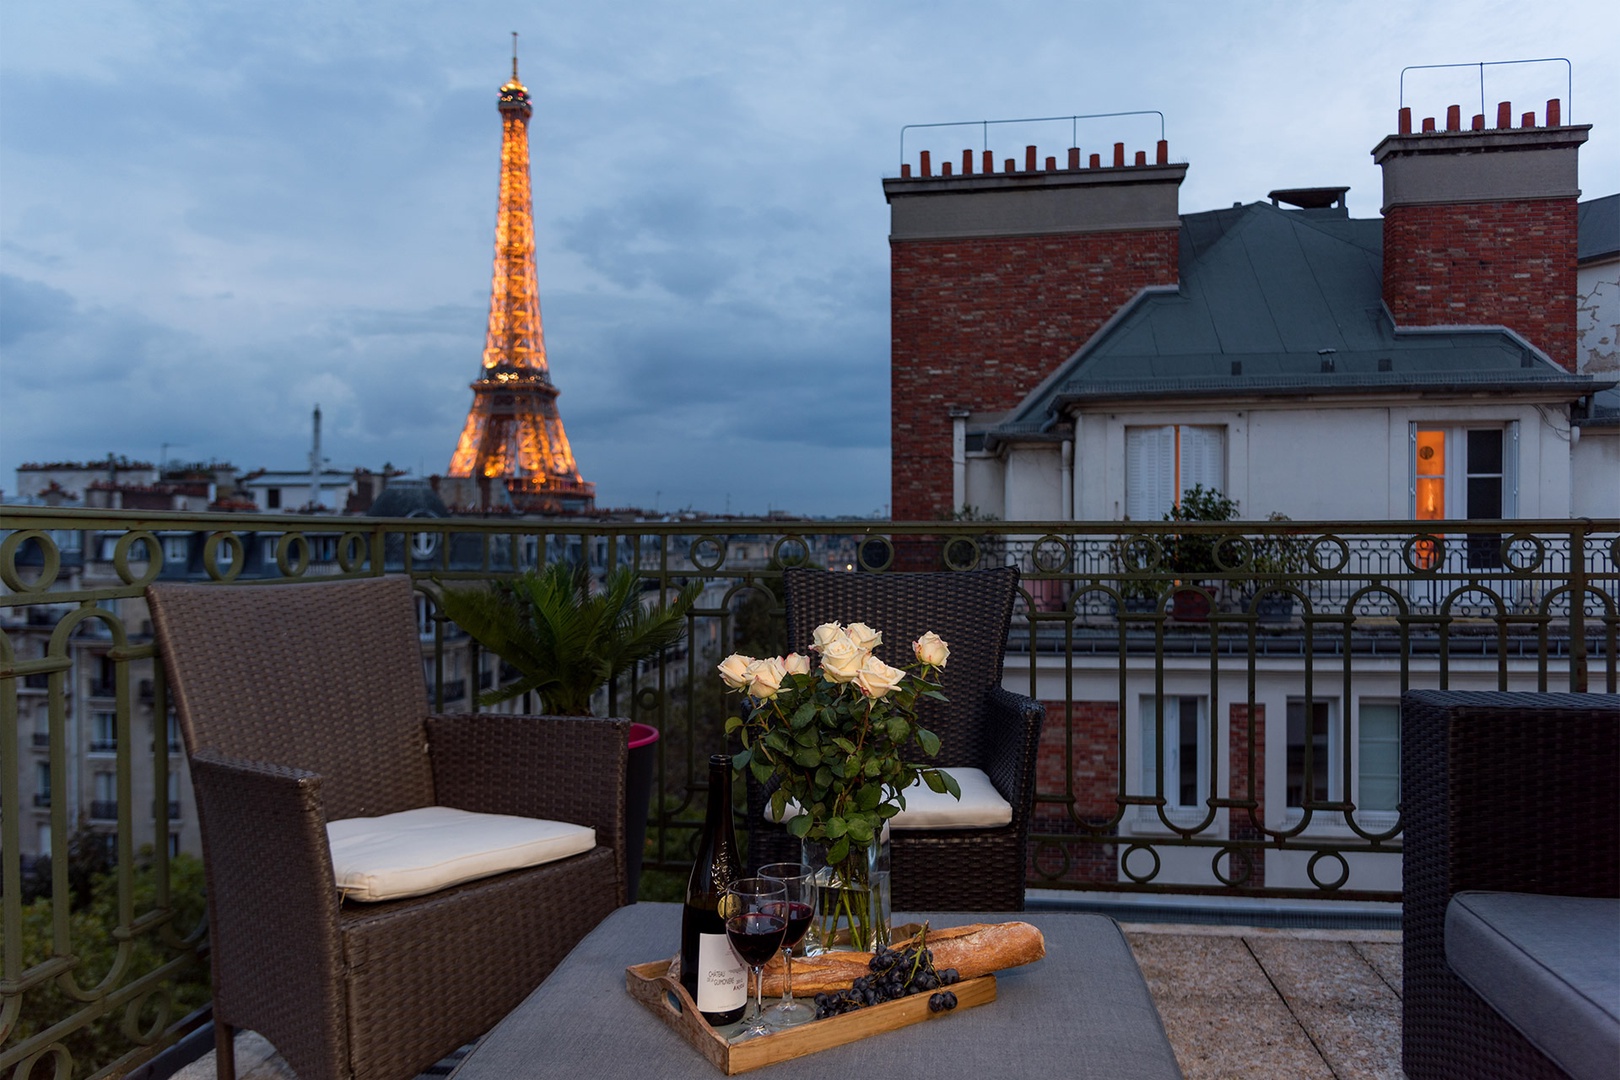 Enjoy amazing Eiffel Tower views right from your balcony.